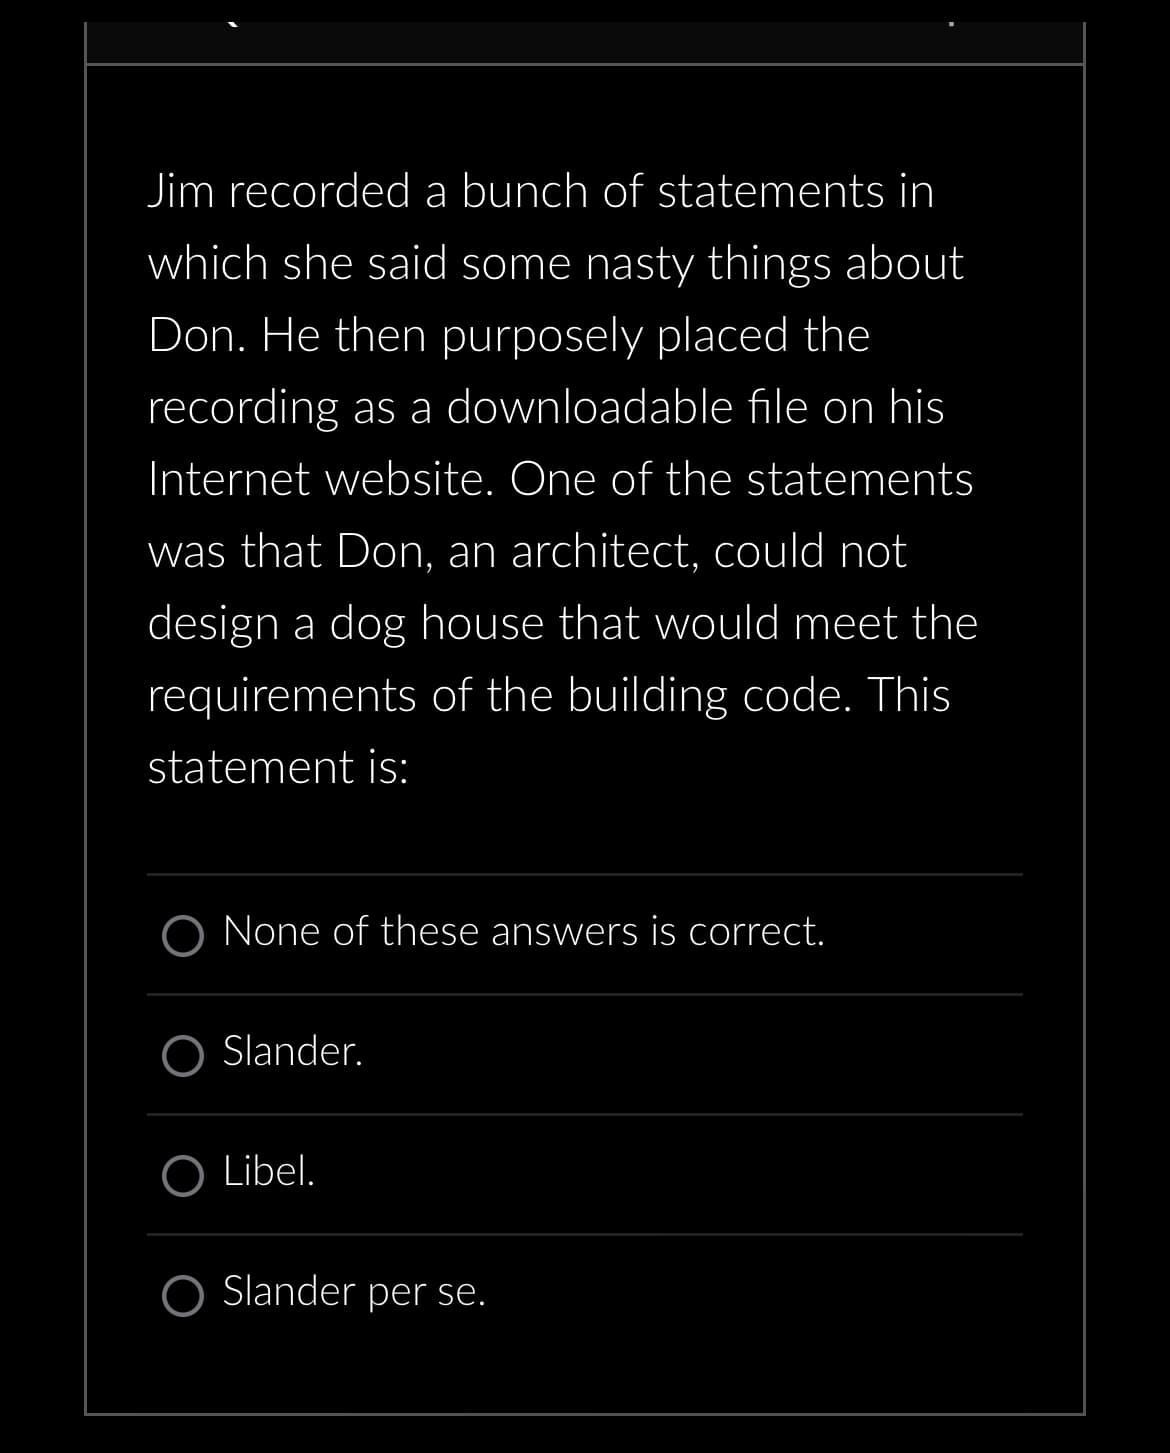 Jim recorded a bunch of statements in
which she said some nasty things about
Don. He then purposely placed the
recording as a downloadable file on his
Internet website. One of the statements
was that Don, an architect, could not
design a dog house that would meet the
requirements of the building code. This
statement is:
None of these answers is correct.
Slander.
Libel.
O Slander per se.